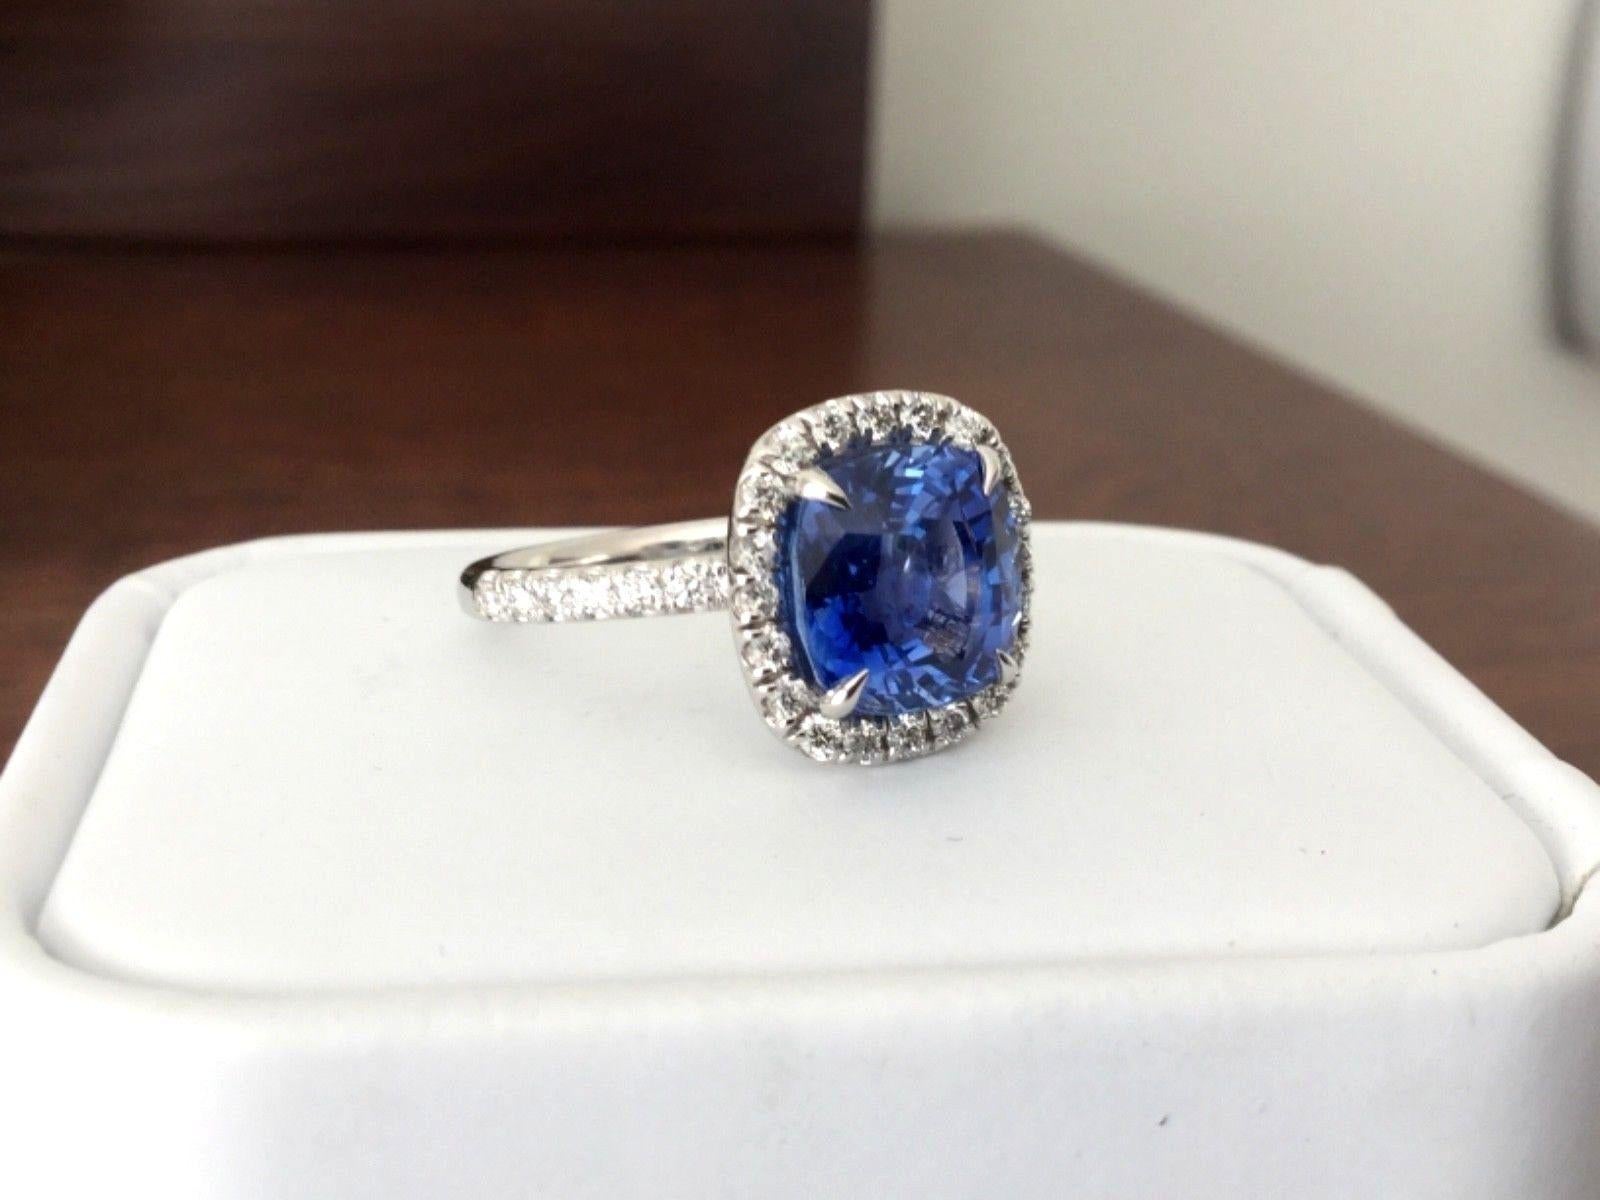 5.21 Carat Unheated Natural Blue Sapphire and Diamond Ring GIA Certified 2